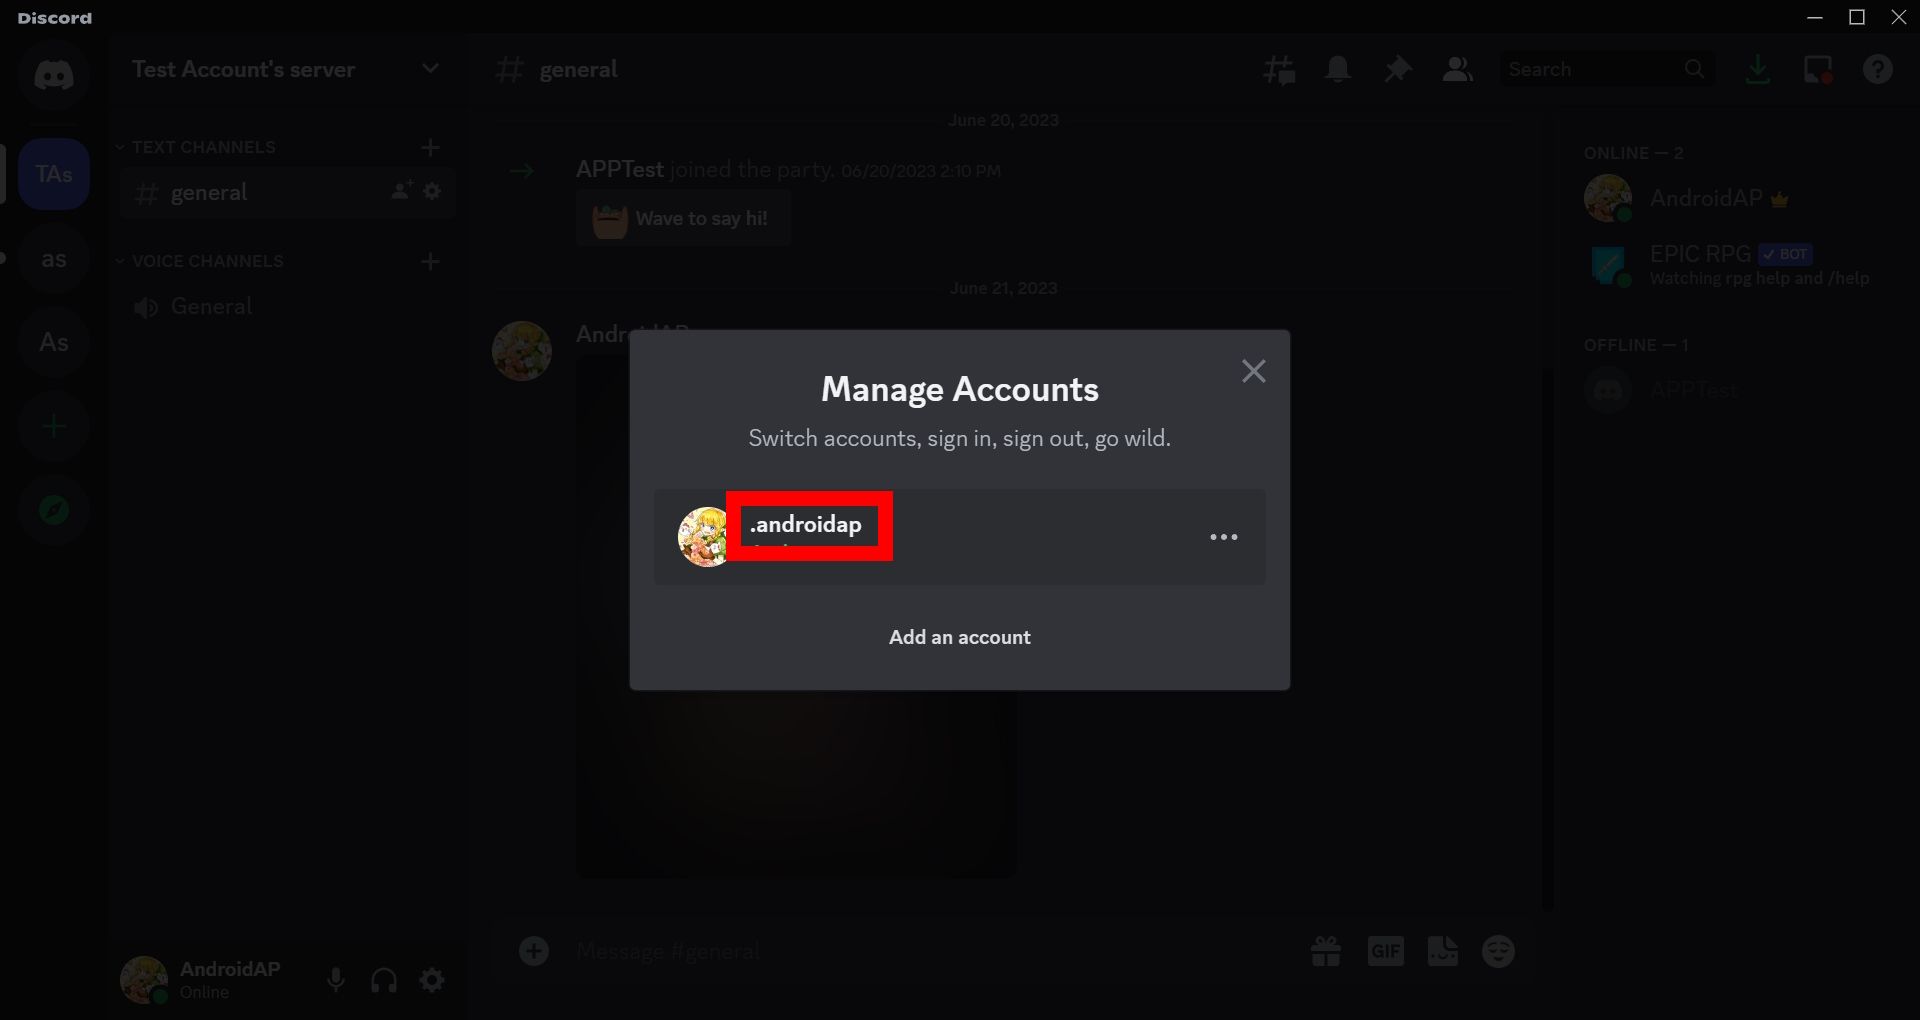 Red rectangle over Discord username in Manage Accounts list